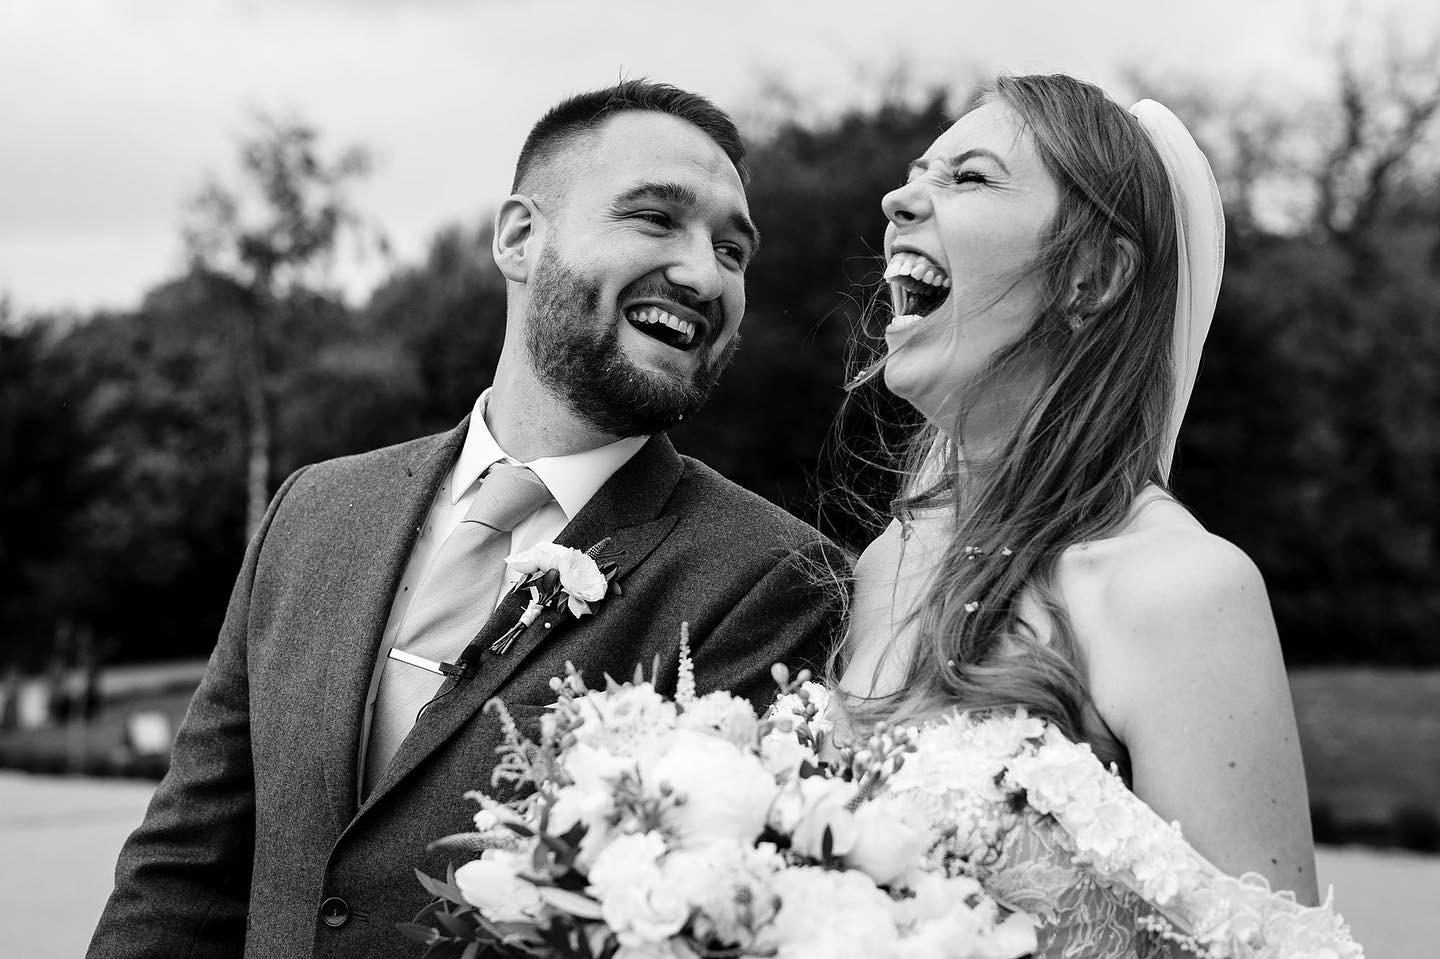 Did you know laughing burns calories? Ok, so it’s no replacement for going to the gym, but google tells me a study found that laughing for 10 to 15 minutes a day can burn approximately 40 calories—which could be enough to lose three or four pounds over the course of a year.

So definitely marry a man who makes you laugh!